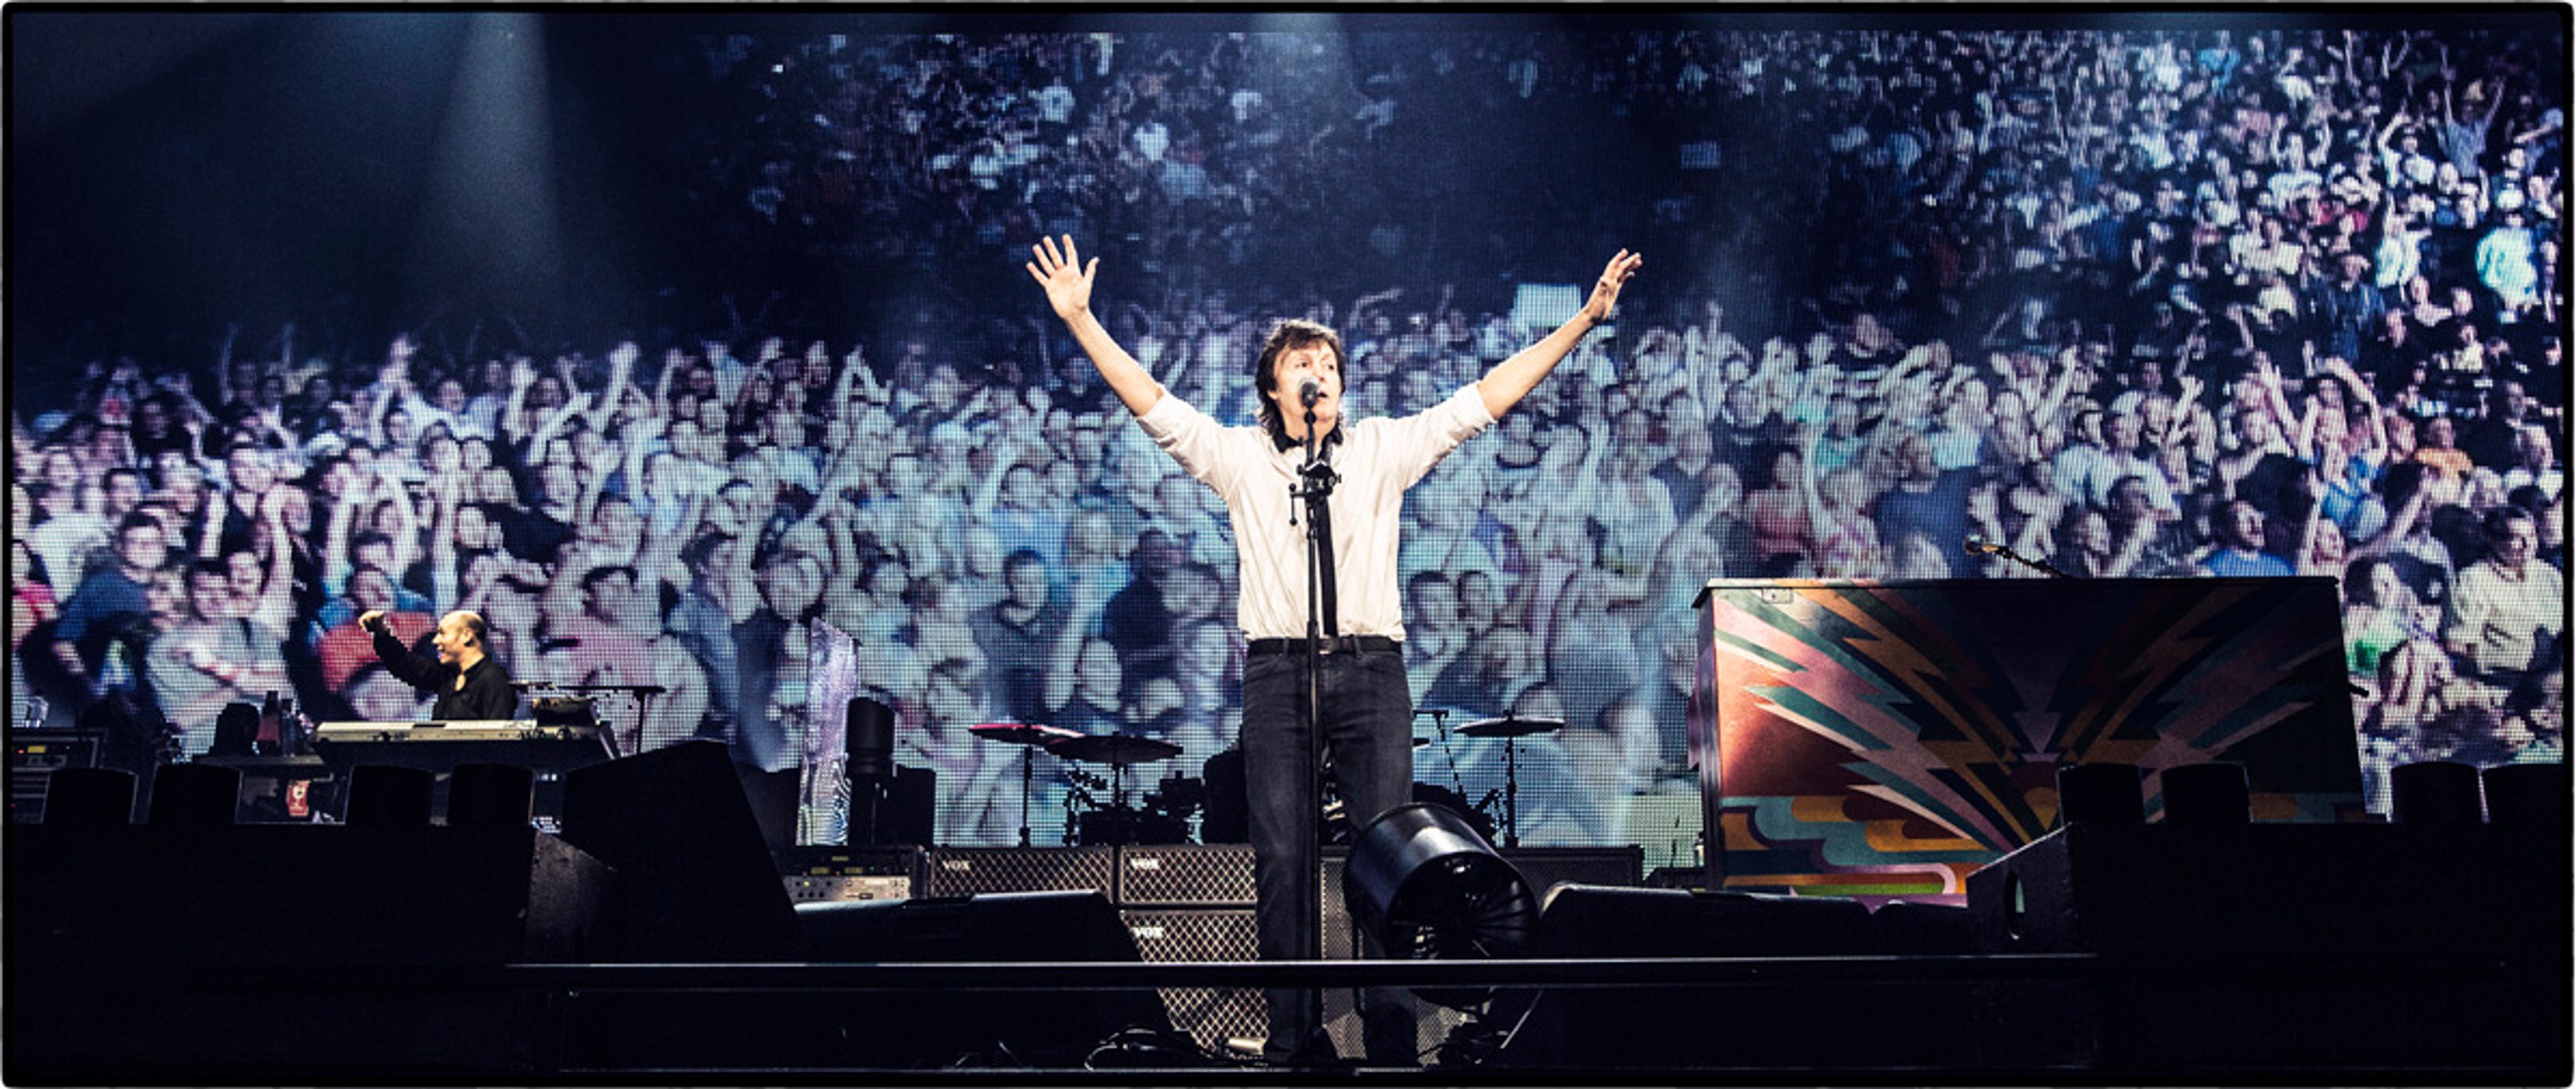 Paul on stage, Bankers Life Fieldhouse, Indianapolis, 14th July 2013